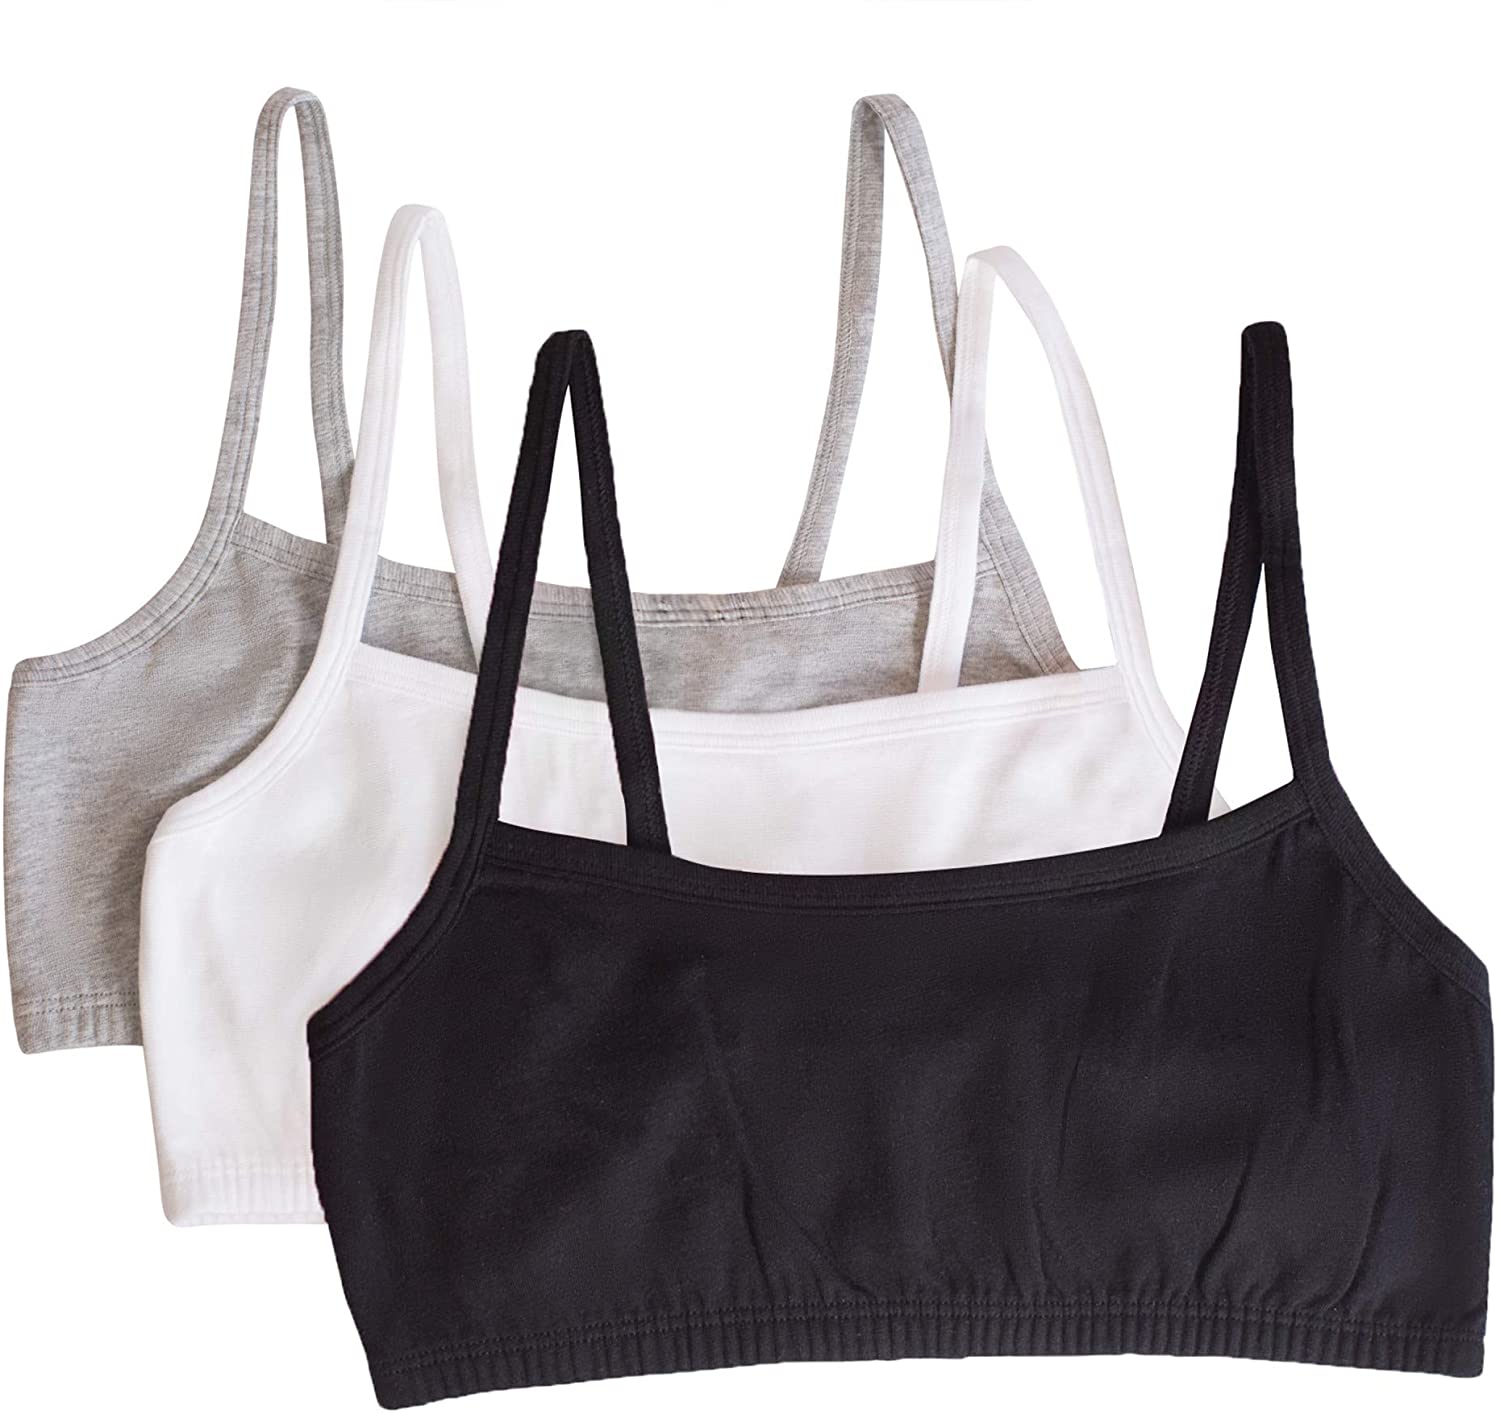 Fruit of the Loom Women's Cotton Pullover Sport Bra(Pack of 3) Size 32